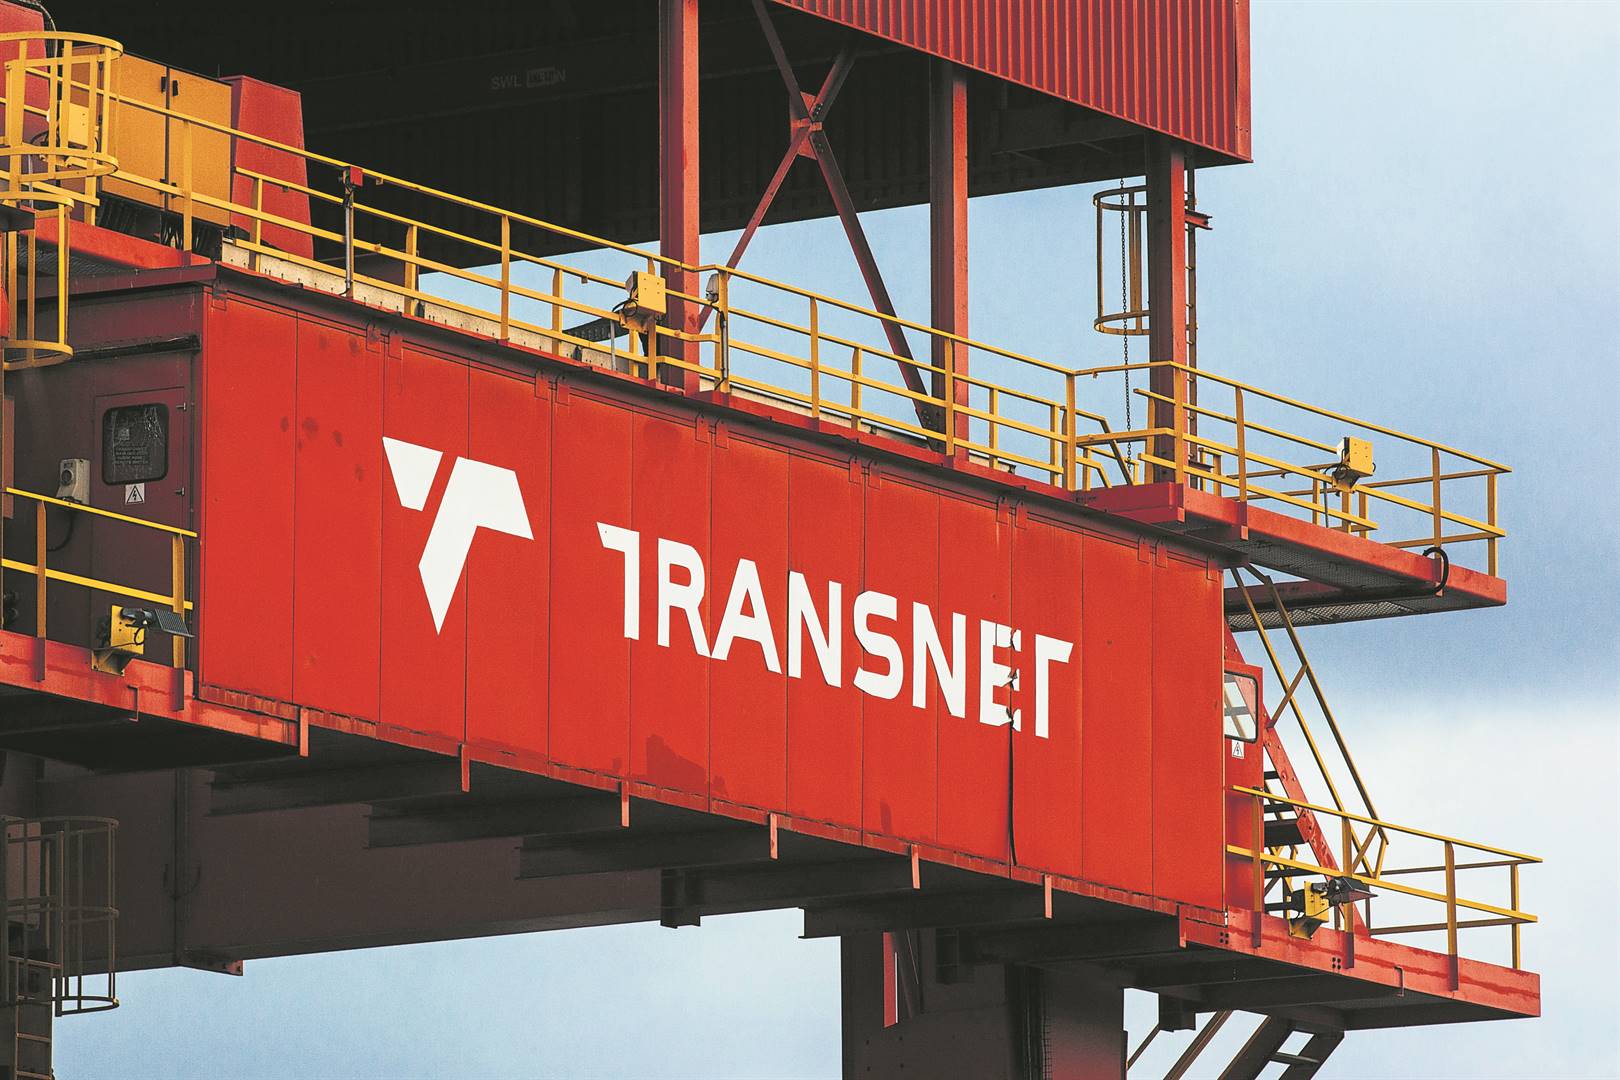 Transnet executives in hot water over R30 million scandal. Photo by Getty Images